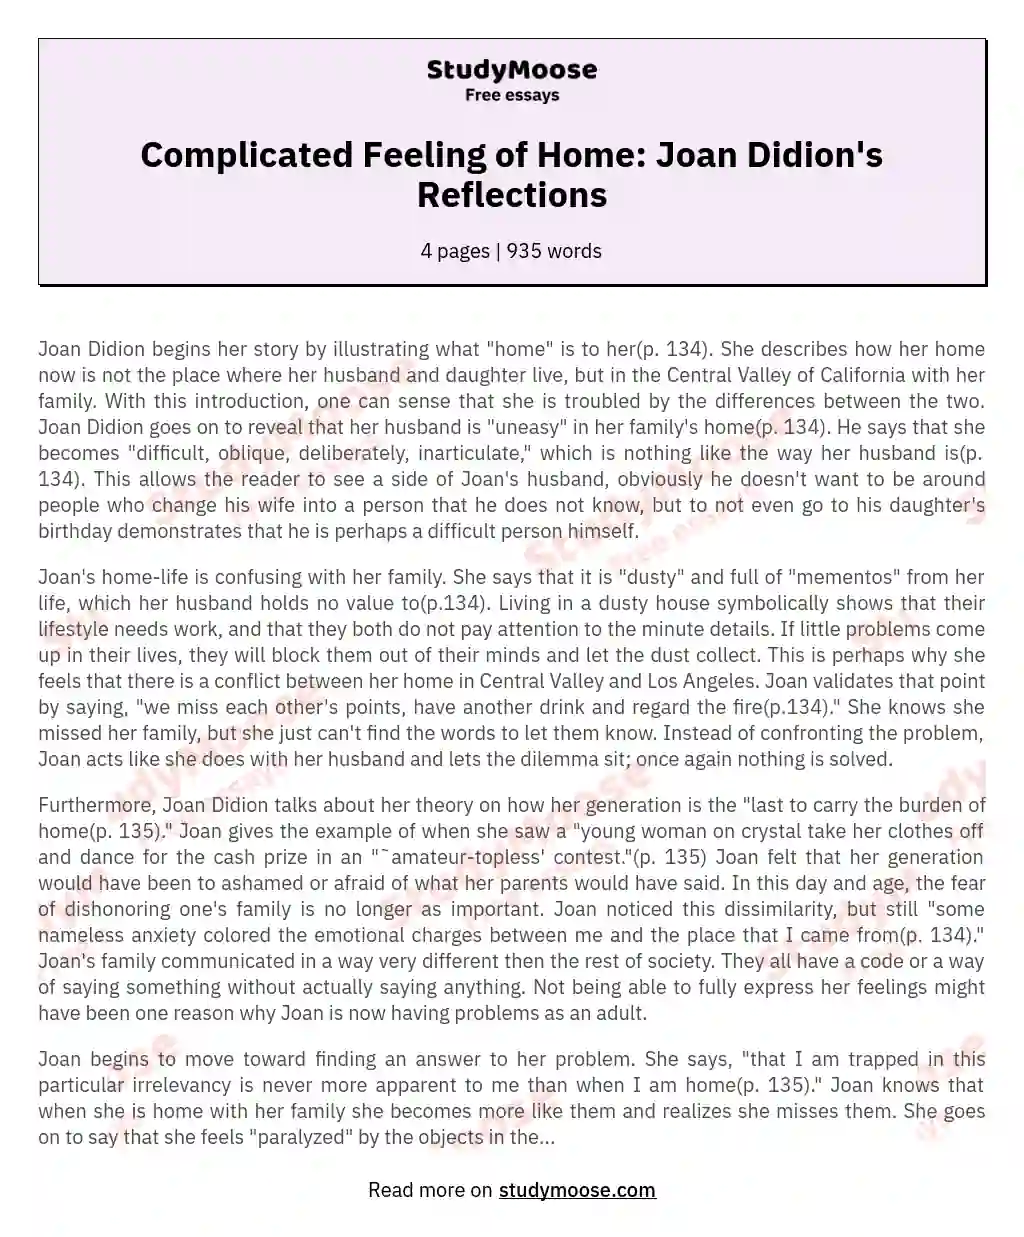 Complicated Feeling of Home: Joan Didion's Reflections essay